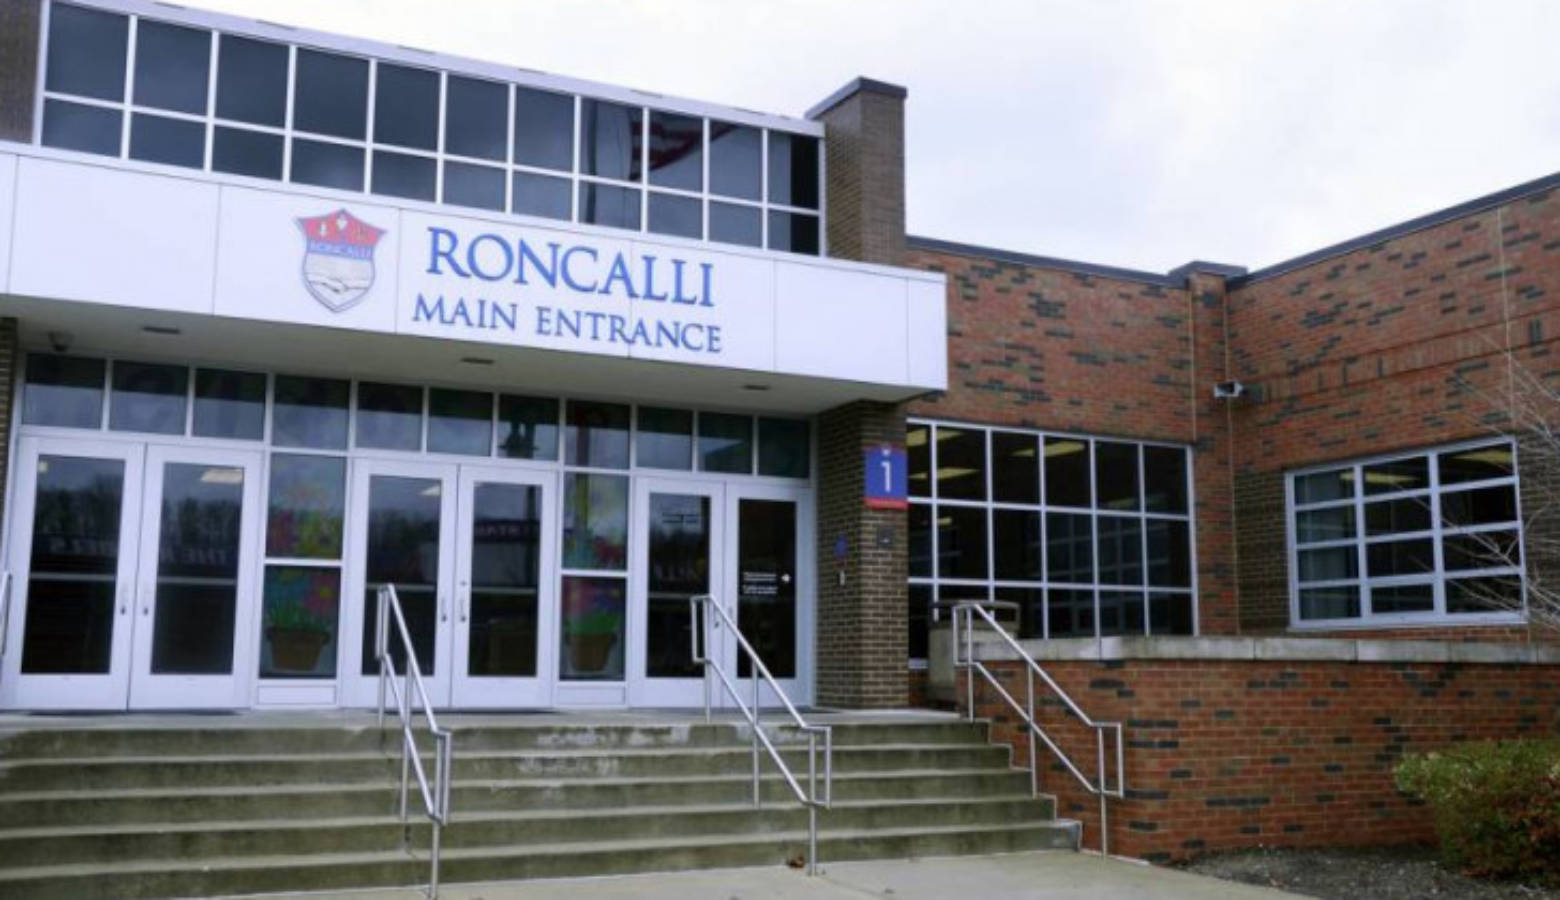 Shelly Fitzgerald, a Roncalli High School guidance counselor placed on paid administrative leave after her marriage to a woman became public, has filed a discrimination claim against the school and the Archdiocese of Indianapolis.